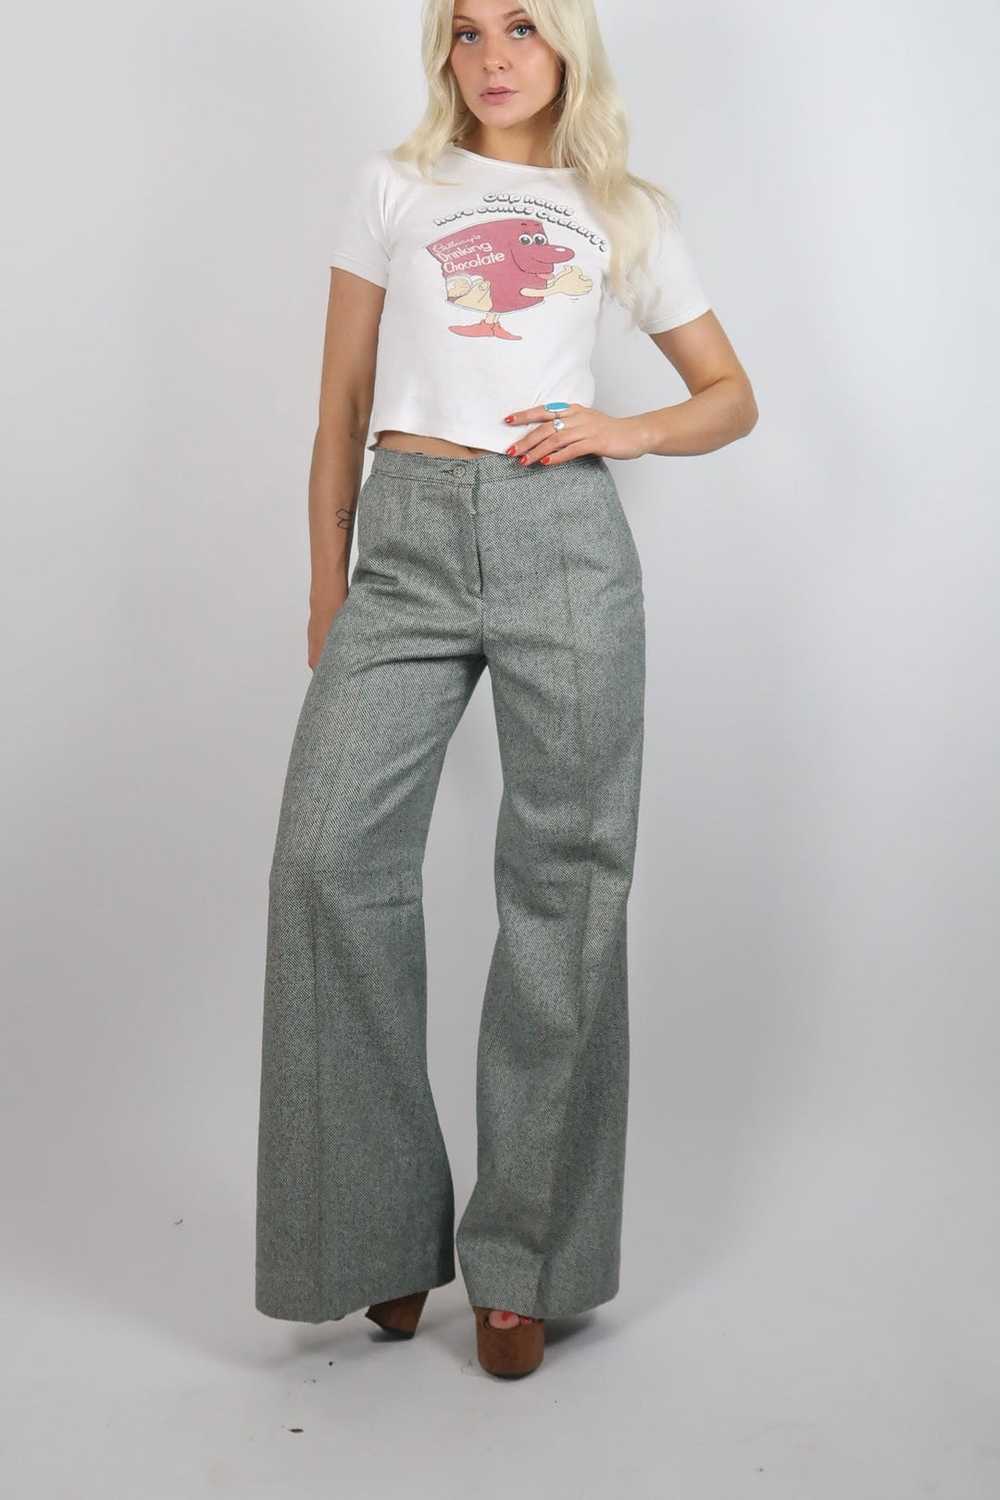 1970s deadstock wool flares - image 4